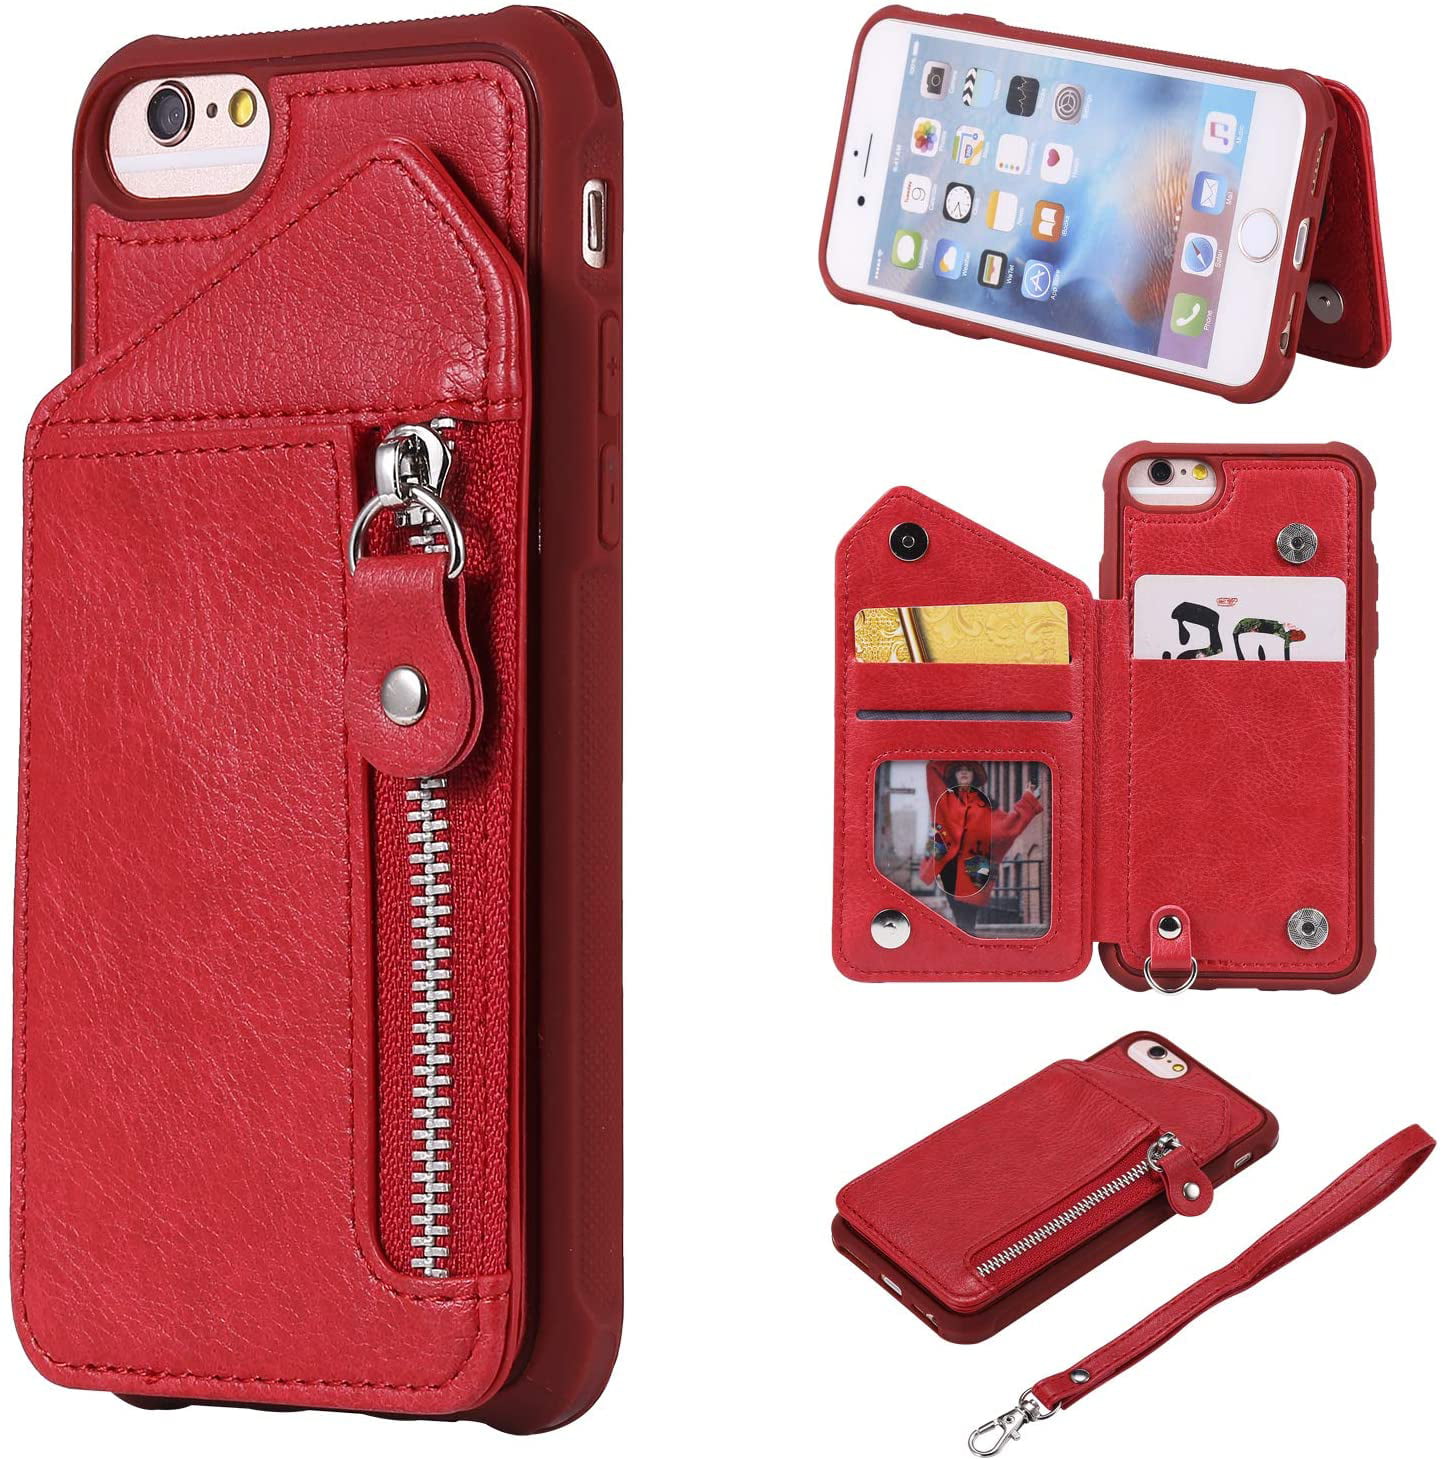 Leather Flip Case for iPhone 8 Business Gifts Wallet Cover Compatible with iPhone 8 with Universal Underwater Waterproof Case 